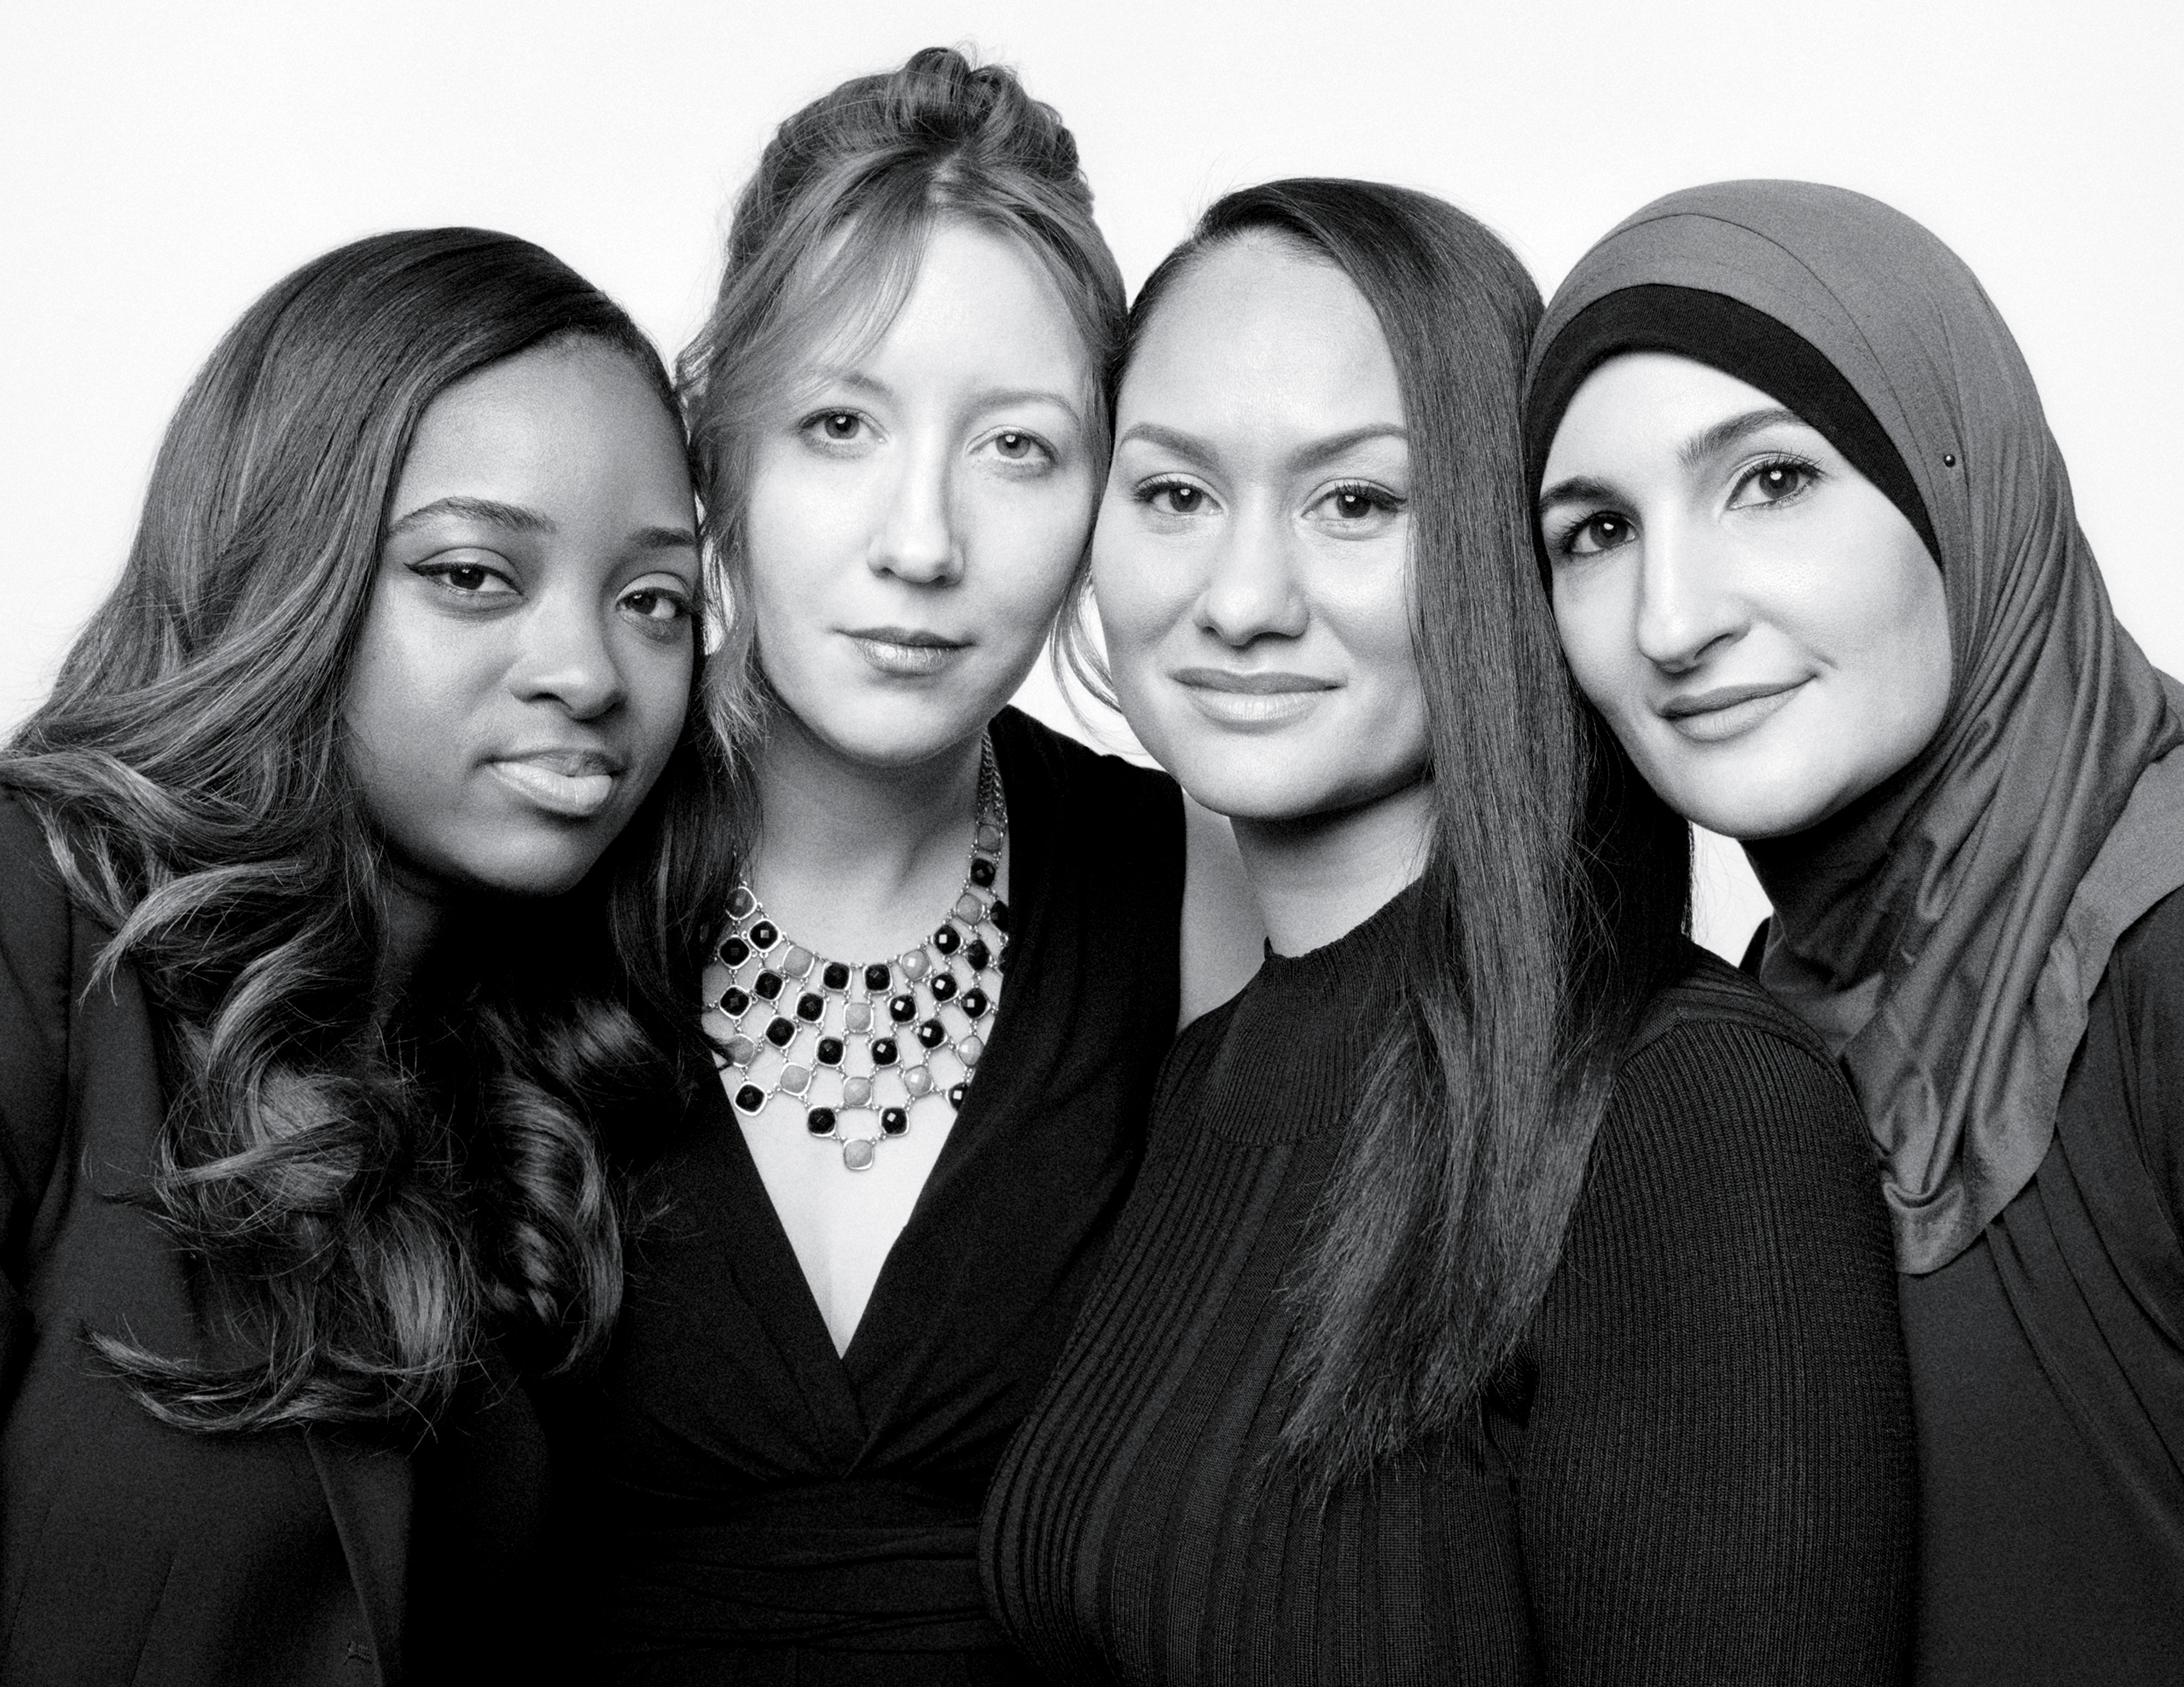 The Women’s March was organized by Tamika Mallory, Bob Bland, Carmen Perez and Linda Sarsour (Jody Rogac for TIME)